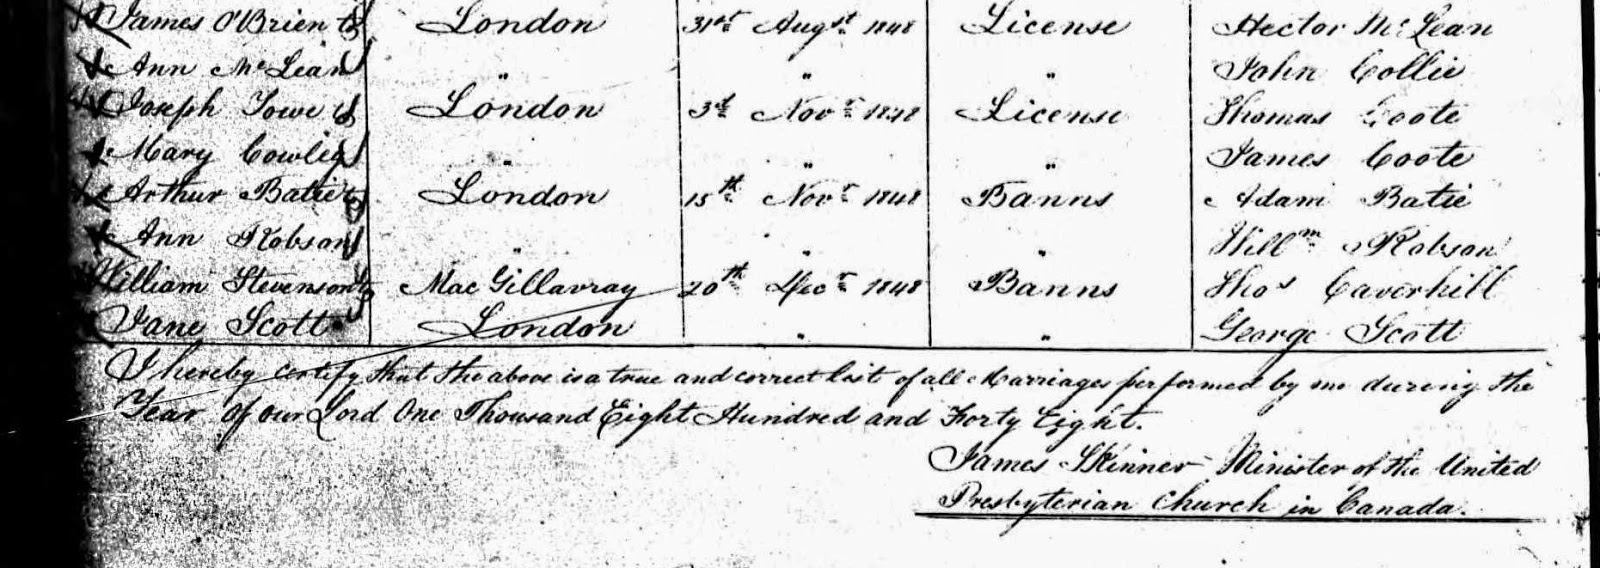 Climbing My Family Tree: McLean-O'Brien Marriage Record (1848 London, Upper Canada)